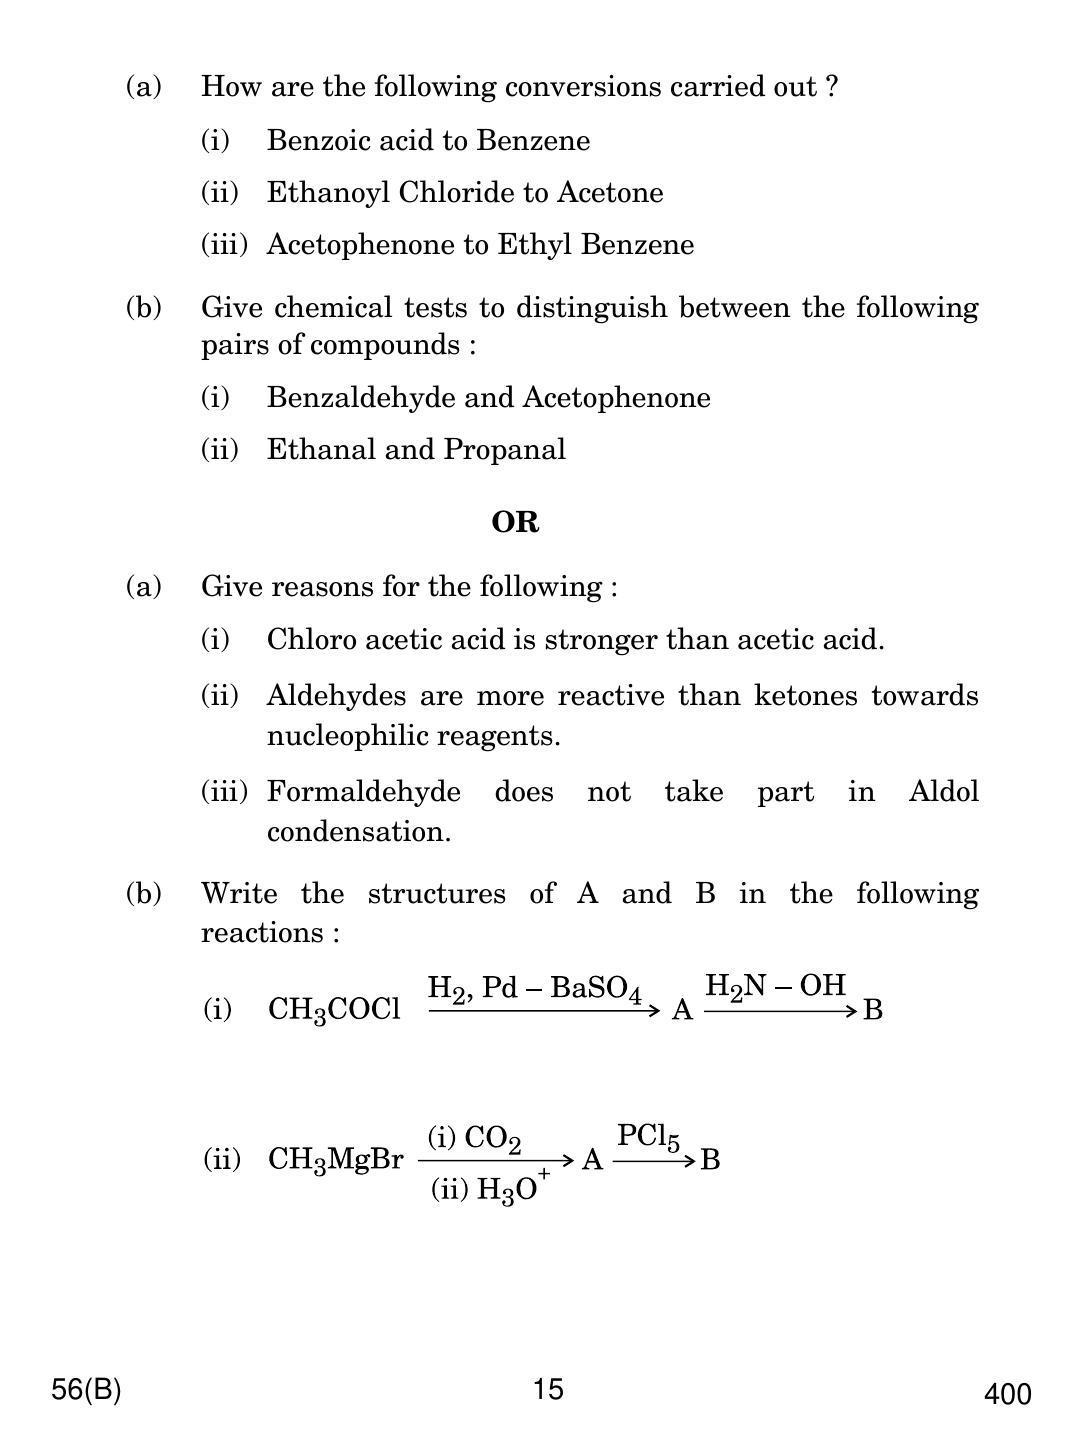 CBSE Class 12 56(B) CHEMISTRY FOR BLIND CANDIDATES 2018 Question Paper - Page 15